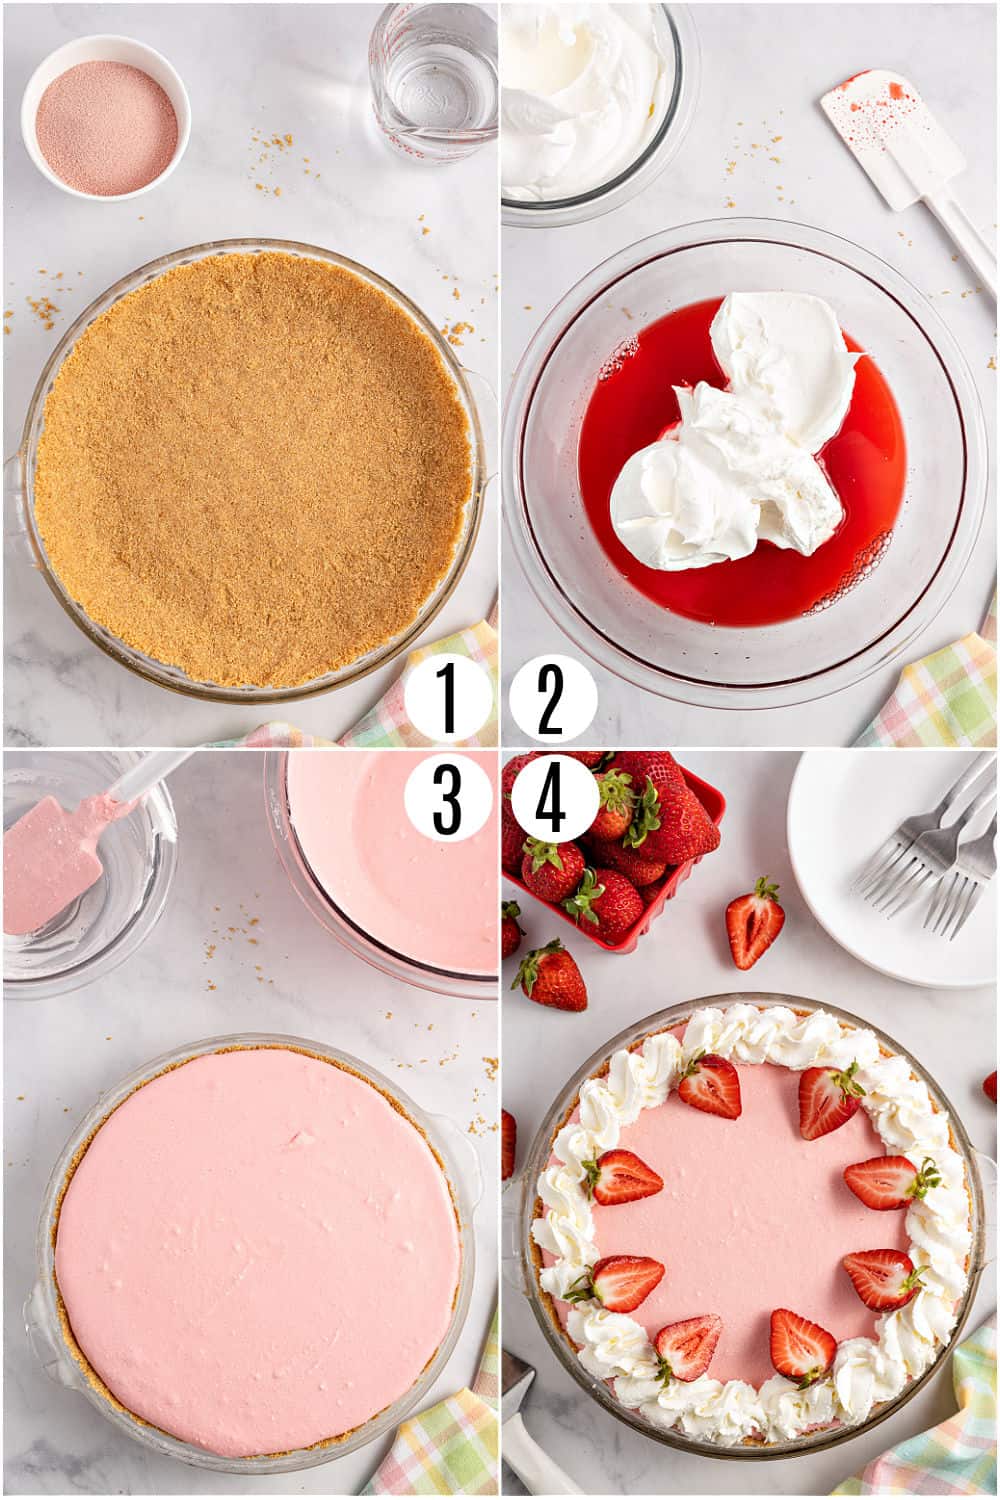 Step by step photo collage showing how to make jello pie.